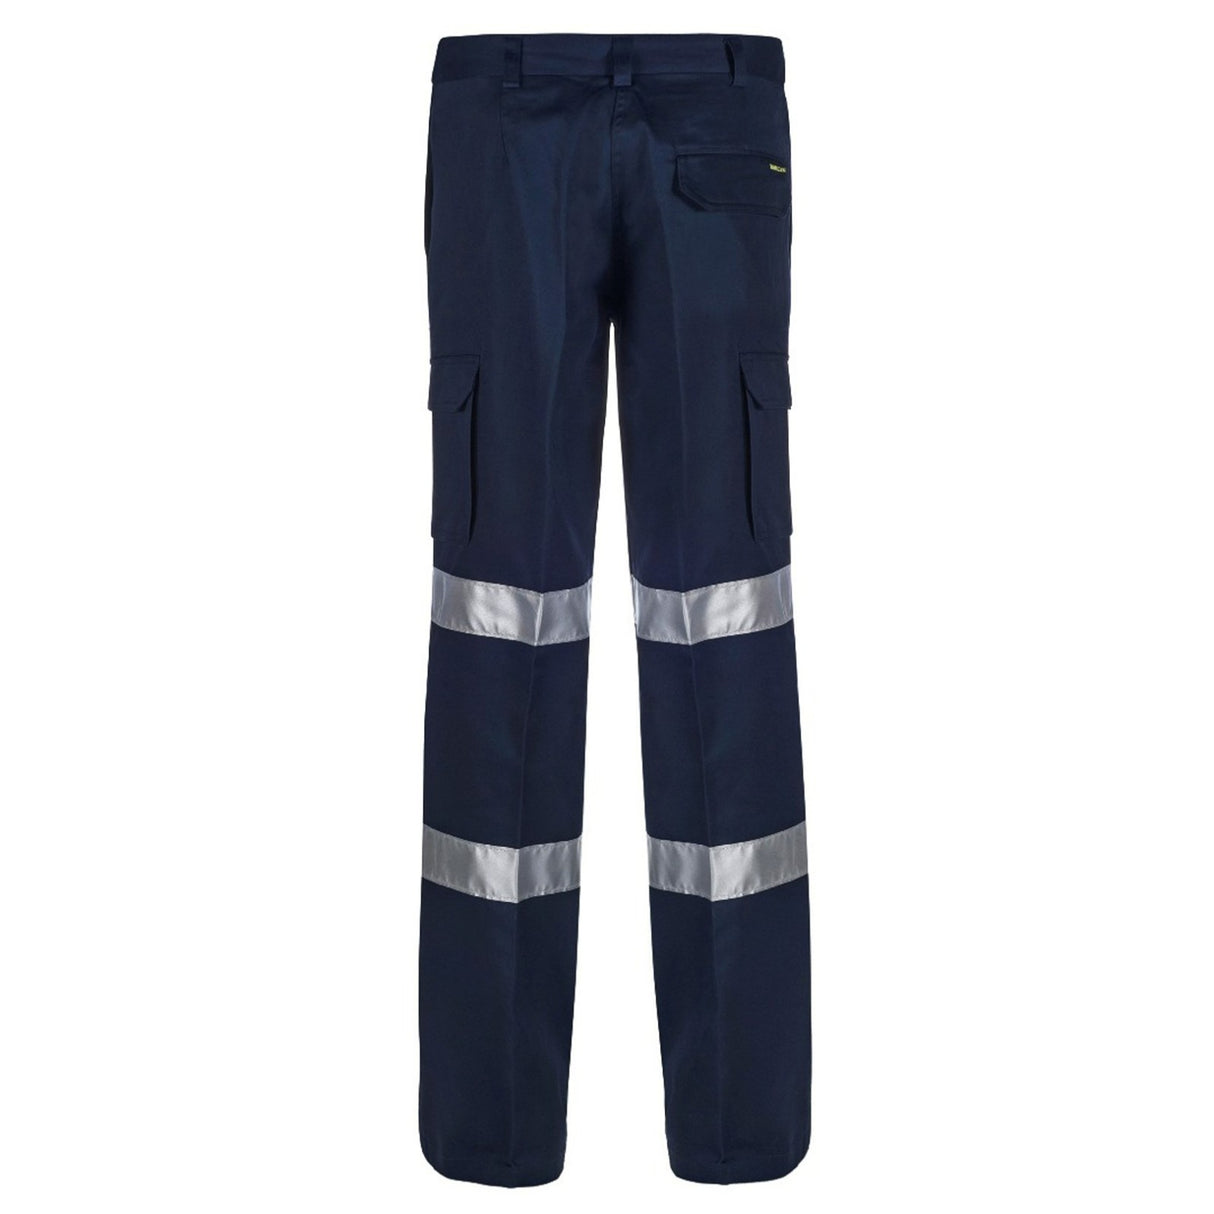 WPL080 Maternity Cargo Reflective Cotton Work Pant